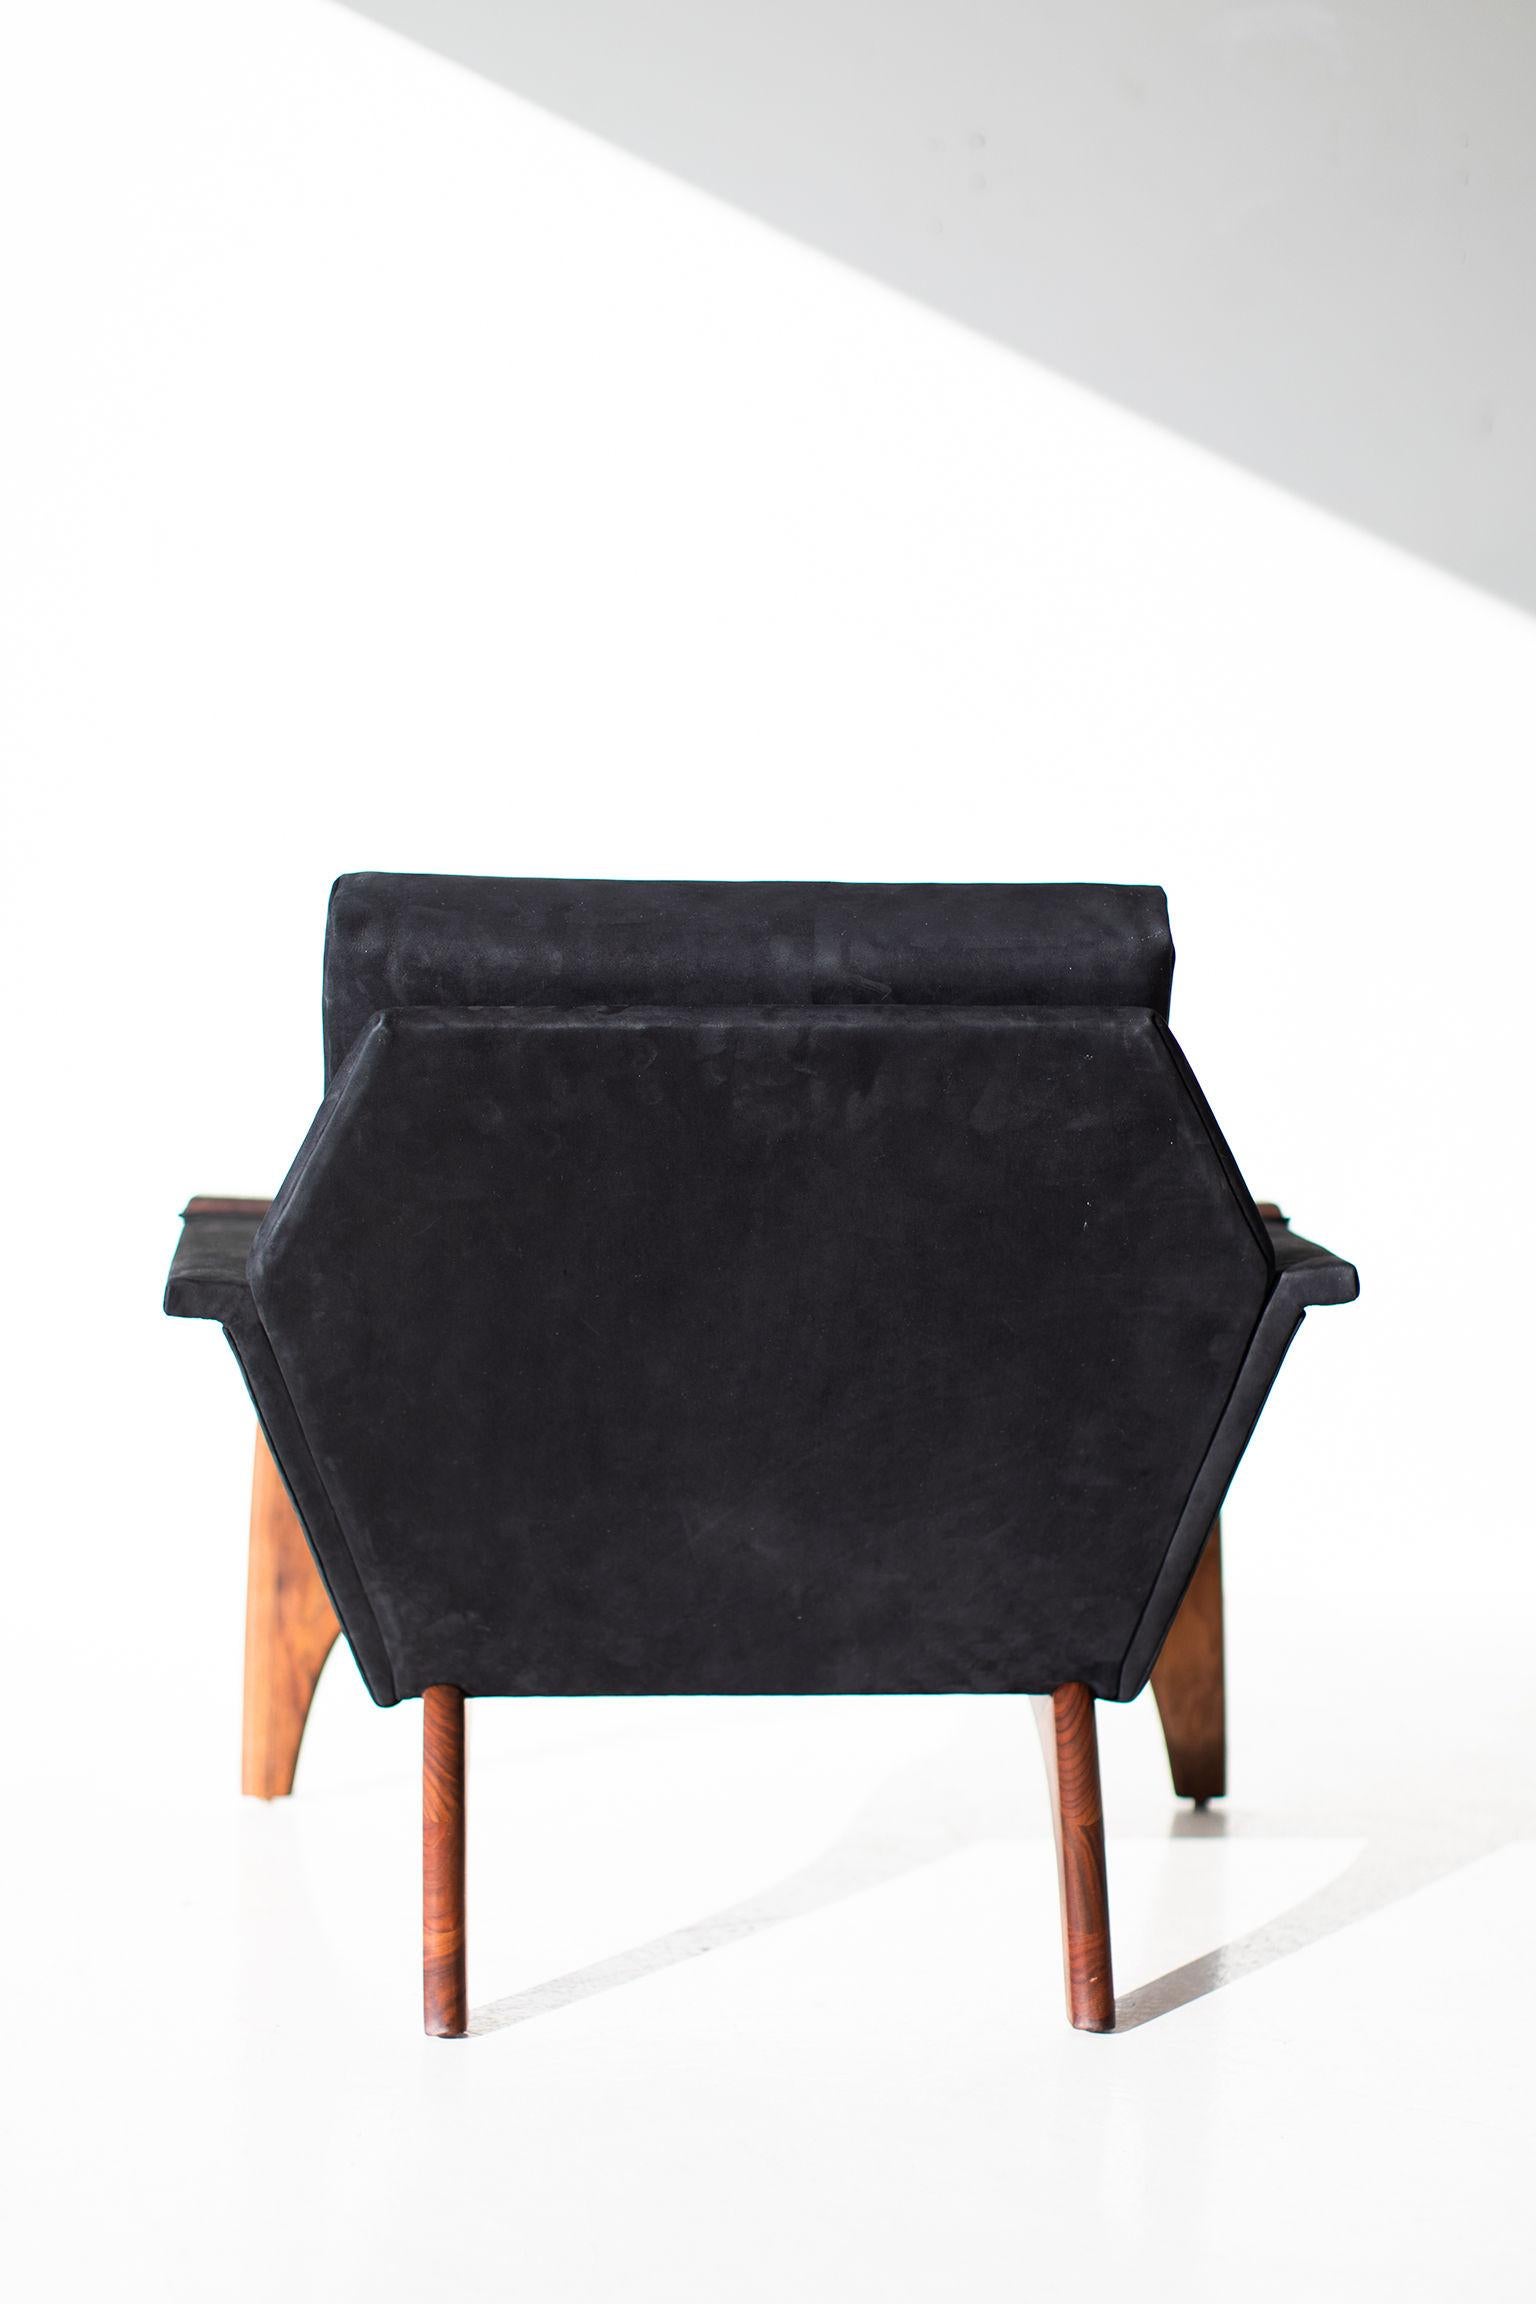 Adrian Pearsall Leather Lounge Chair for Craft Associates Inc. 1